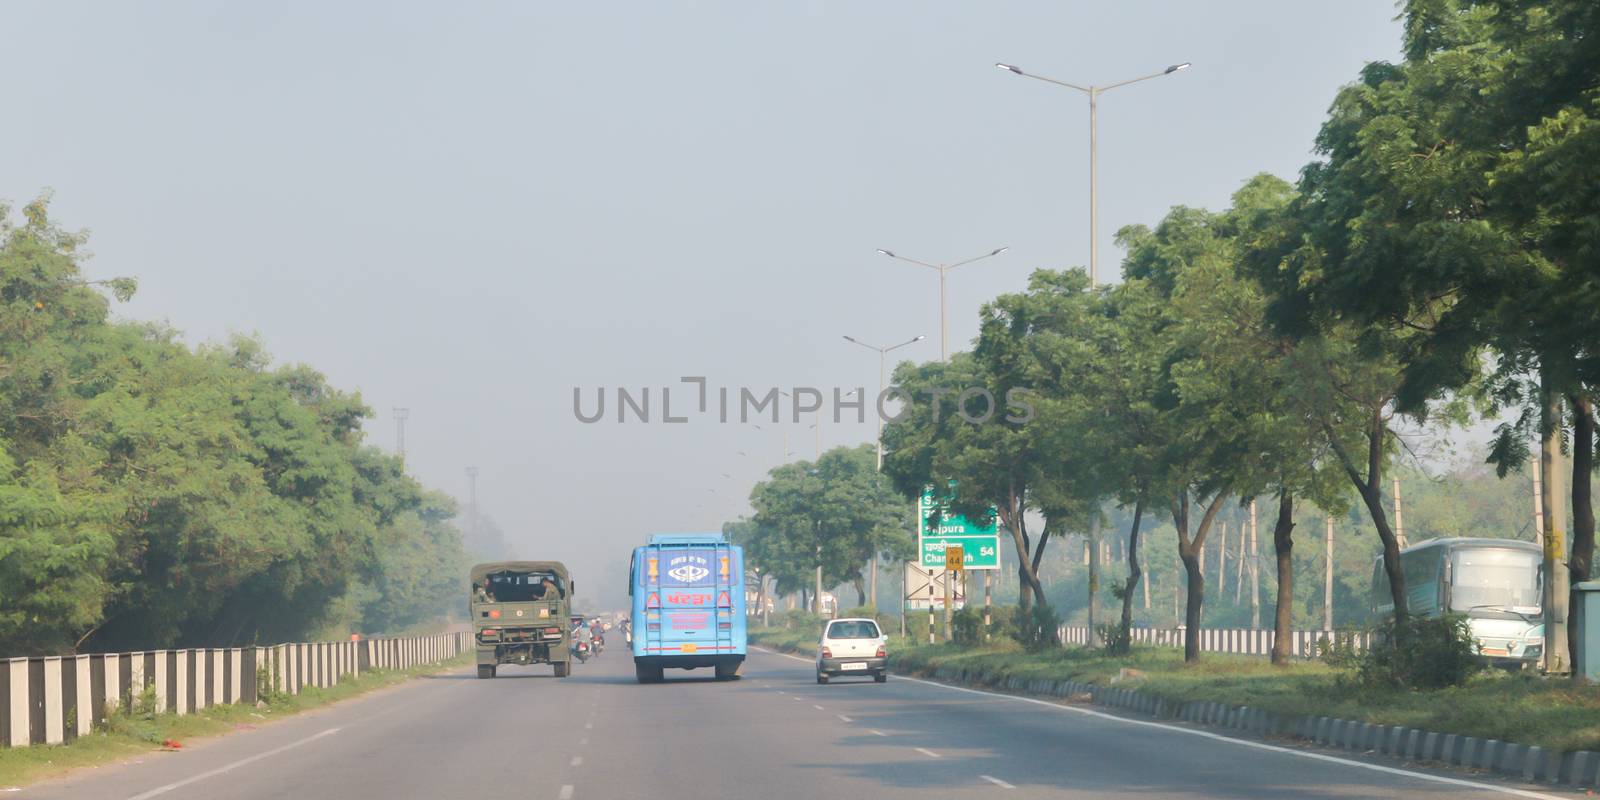 Chandigarh, Punjab, India, South Asia November 2019 - Landscape view of City Street of Chandigarh, the cleanest city of India. by sudiptabhowmick